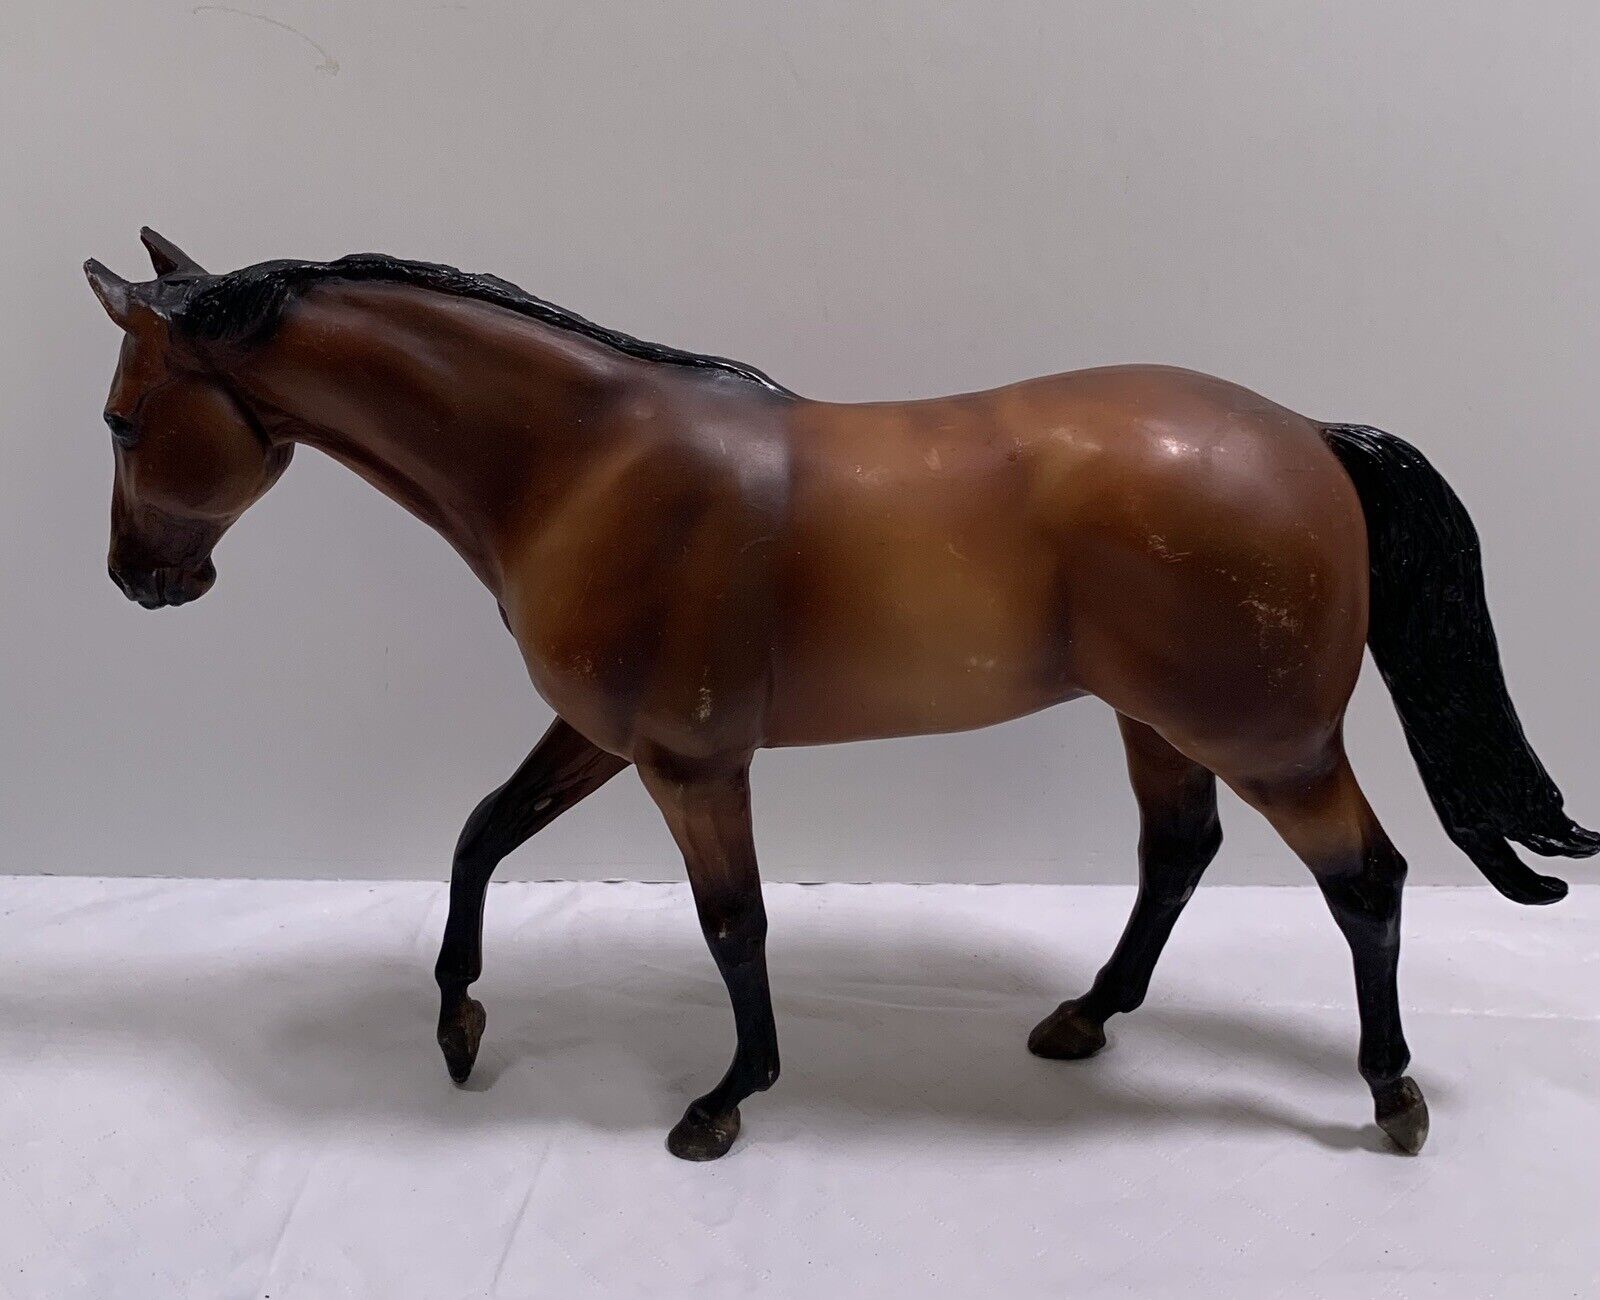 RARE VINTAGE BREYER REEVES HORSE FIGURE BROWN BLACK WALKING scuffed played with